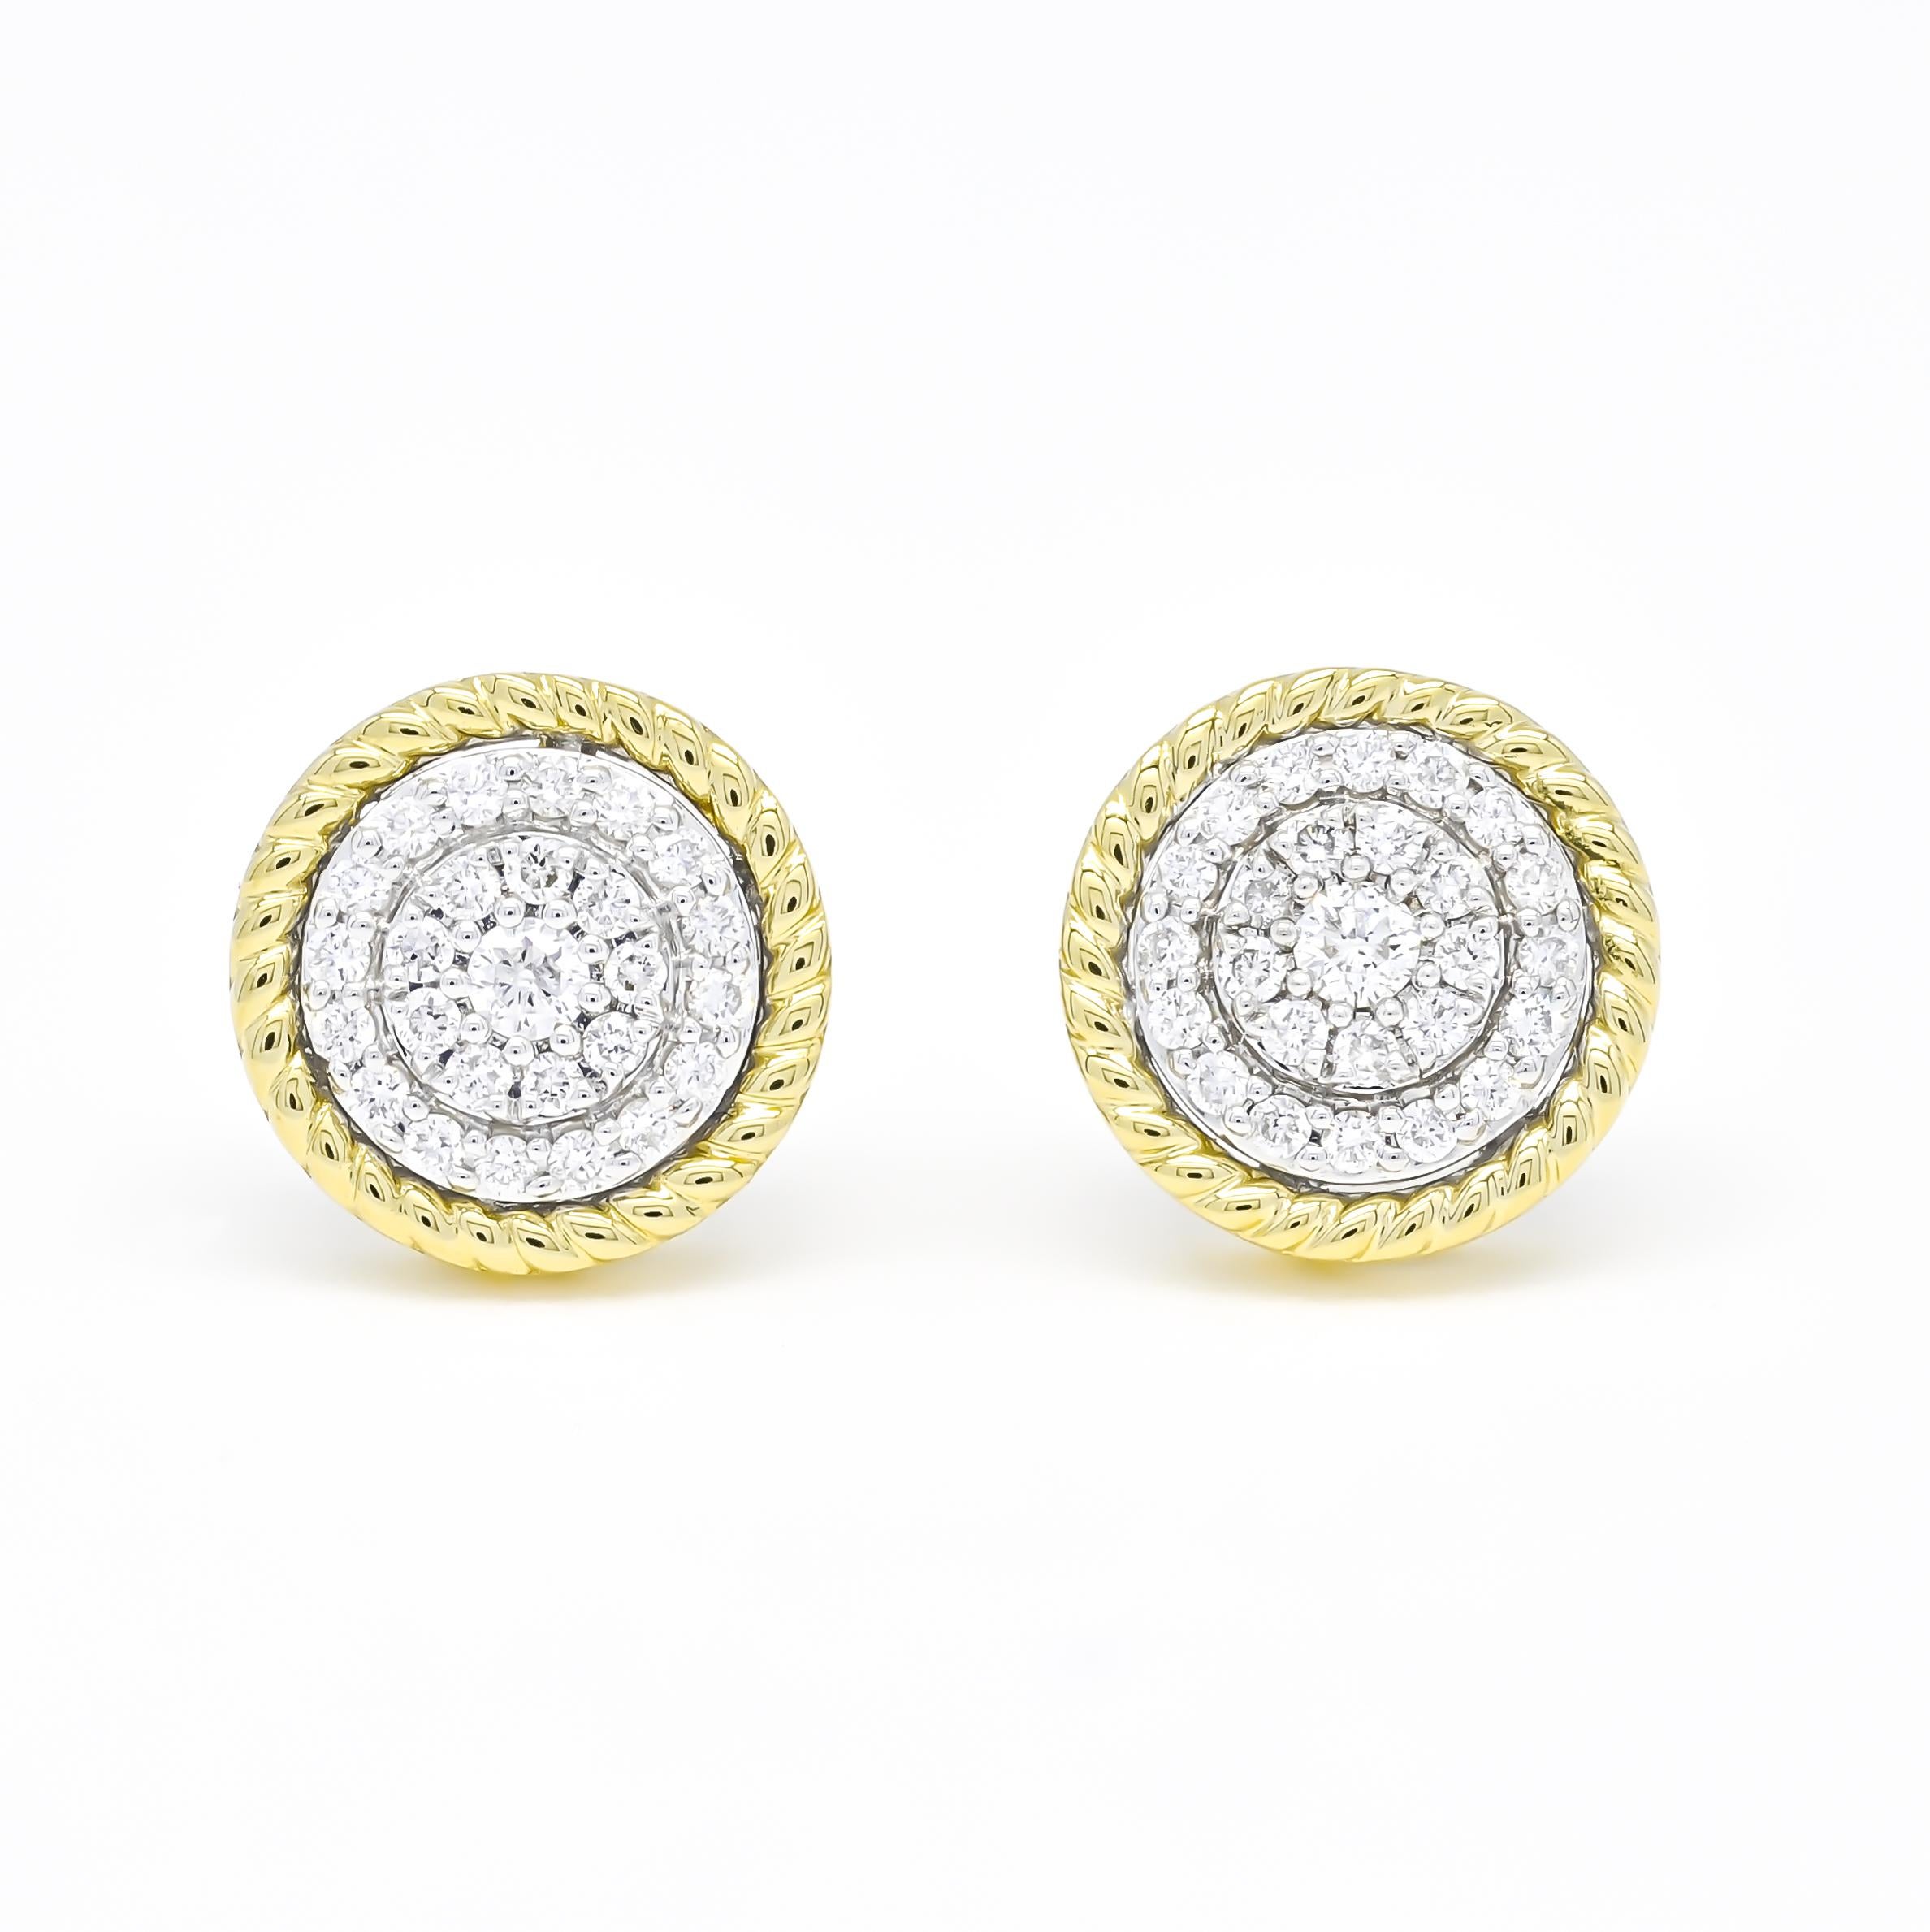  Natural Diamonds 0.50 carats 18 Karat Two Tone Gold Stud Earrings For Sale 1